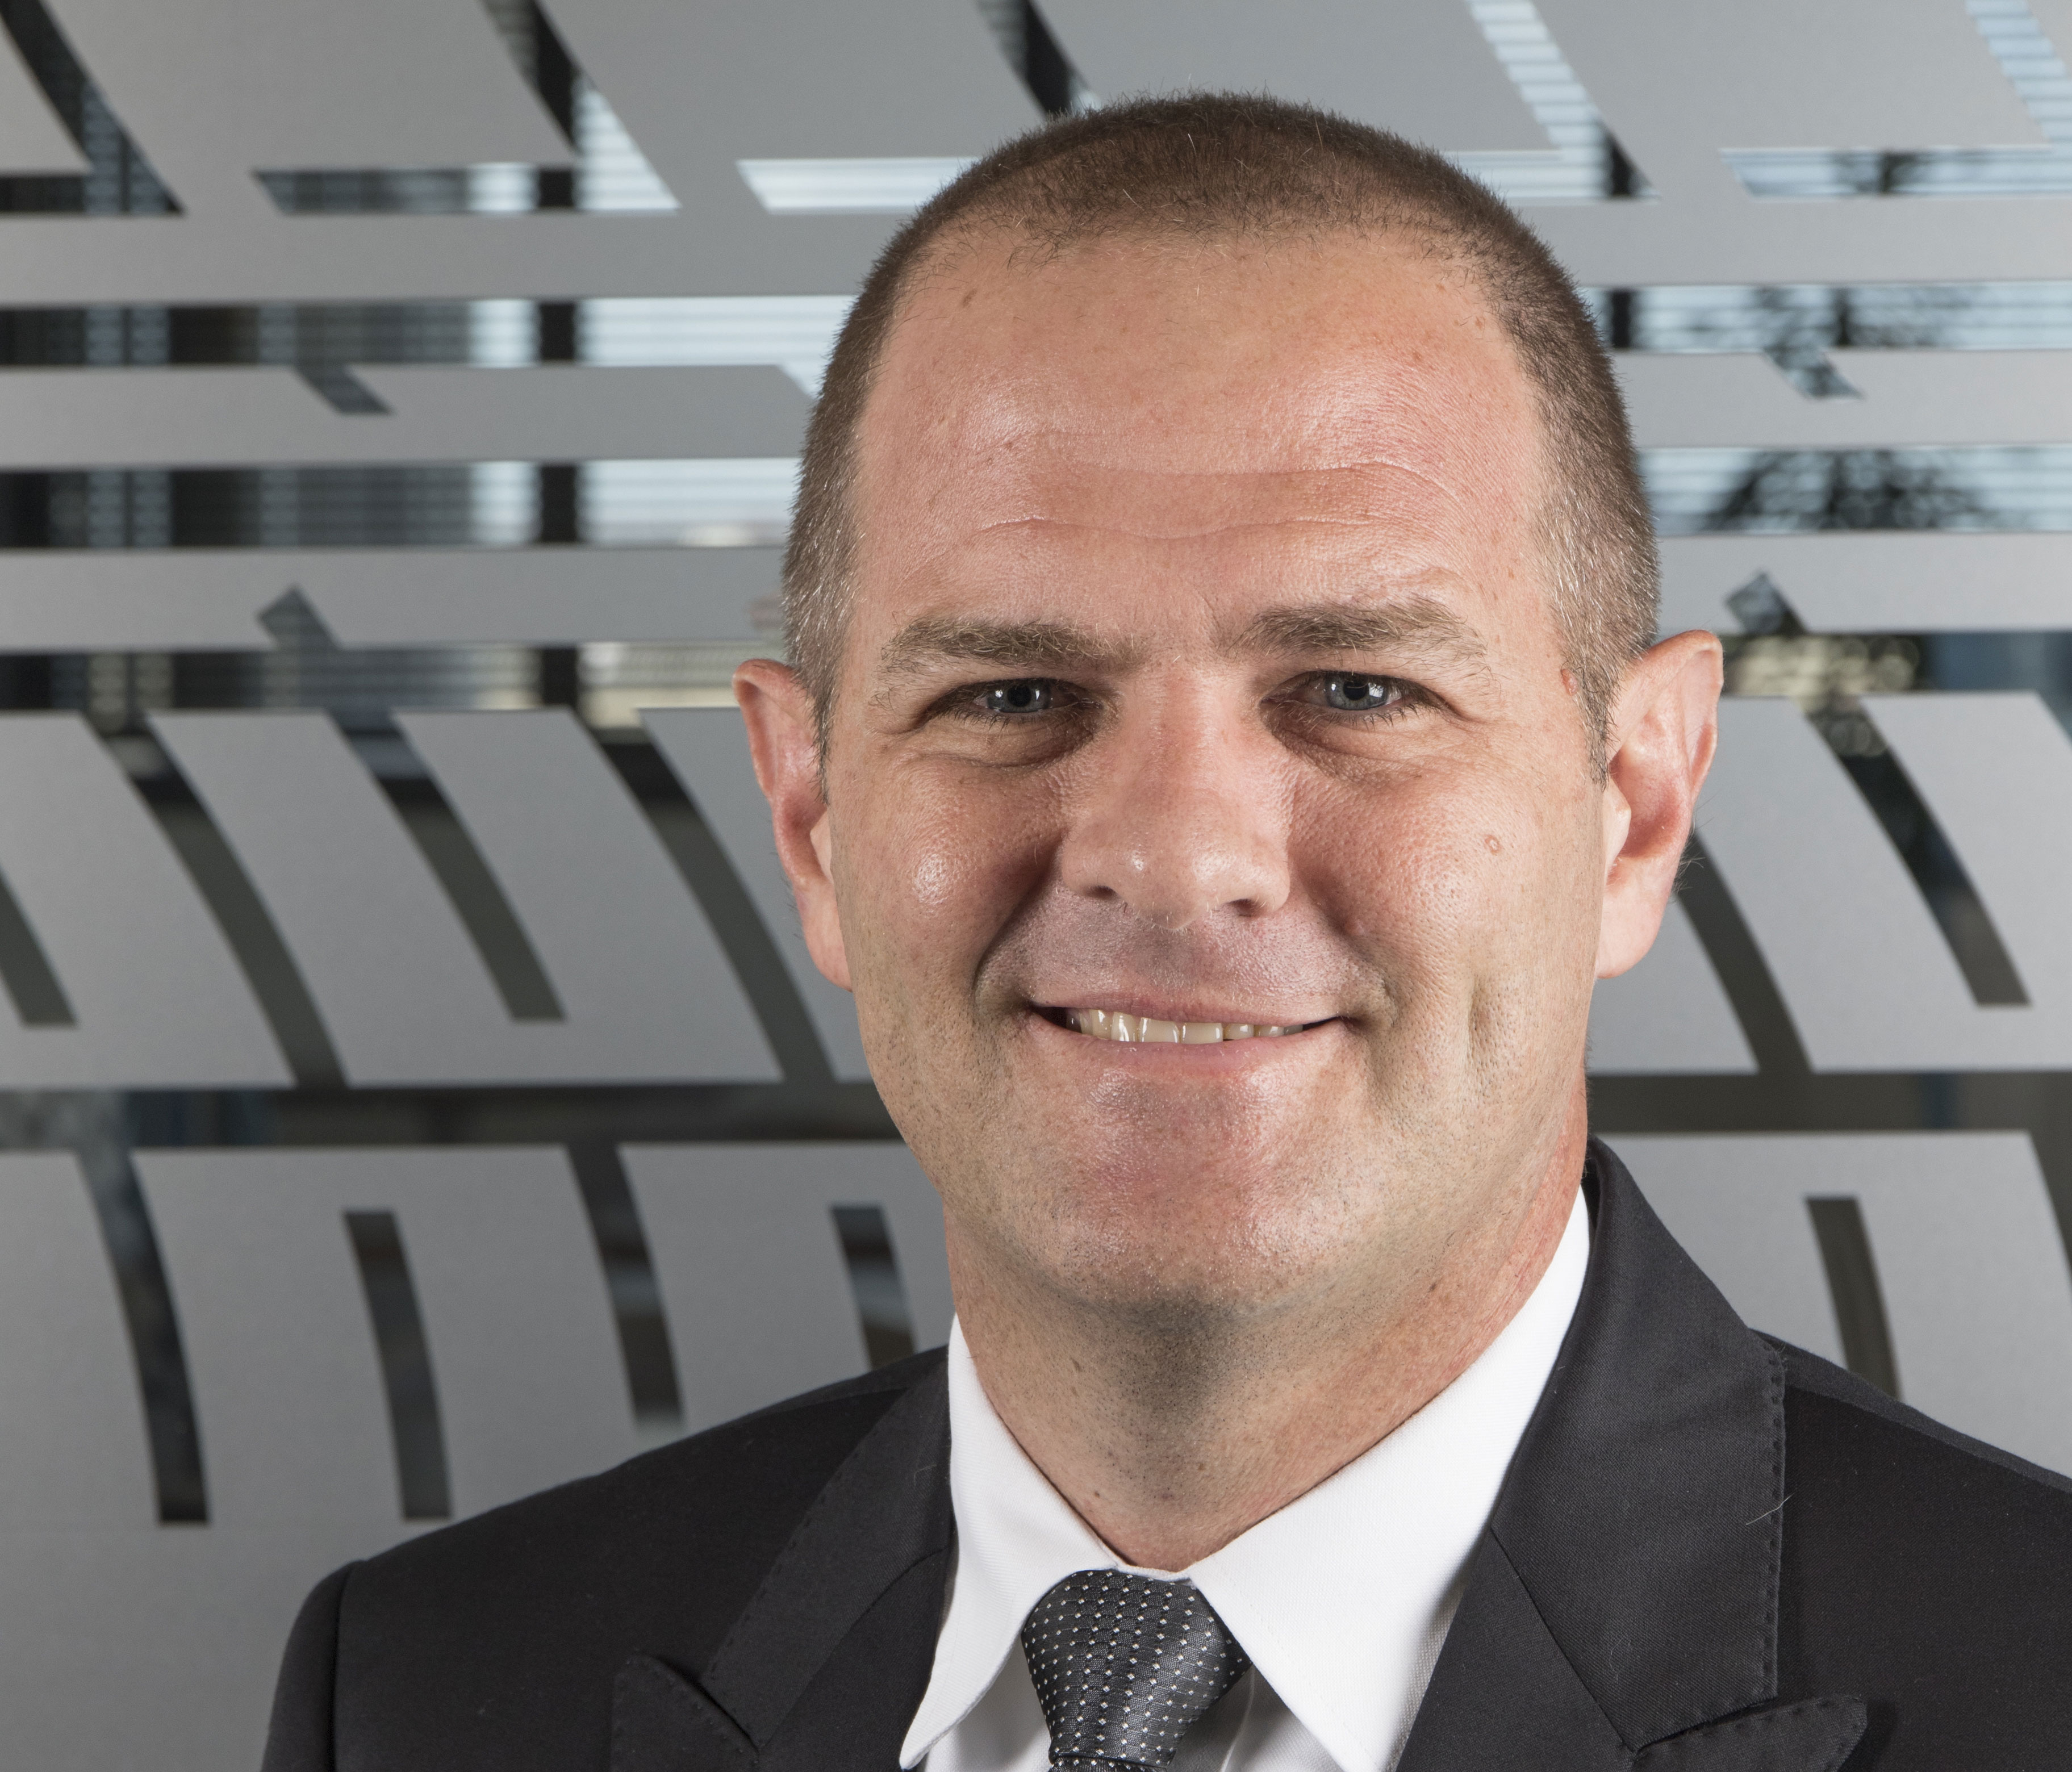 New CEO for Sumitomo Rubber South Africa announced